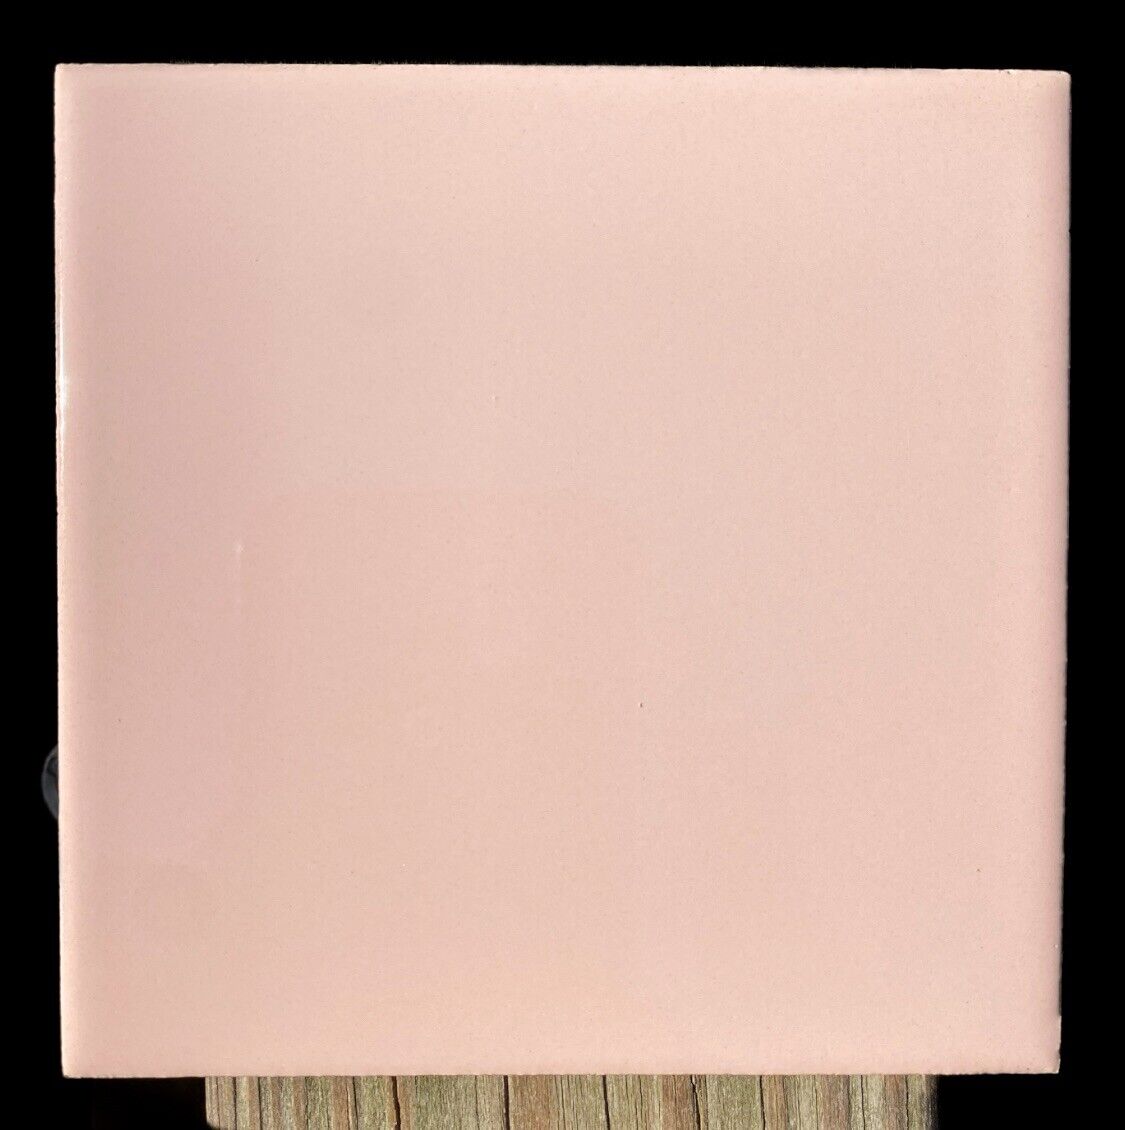 VINTAGE 1953 Pink Wall Tile USQTCO Made In The USA (22) Tiles